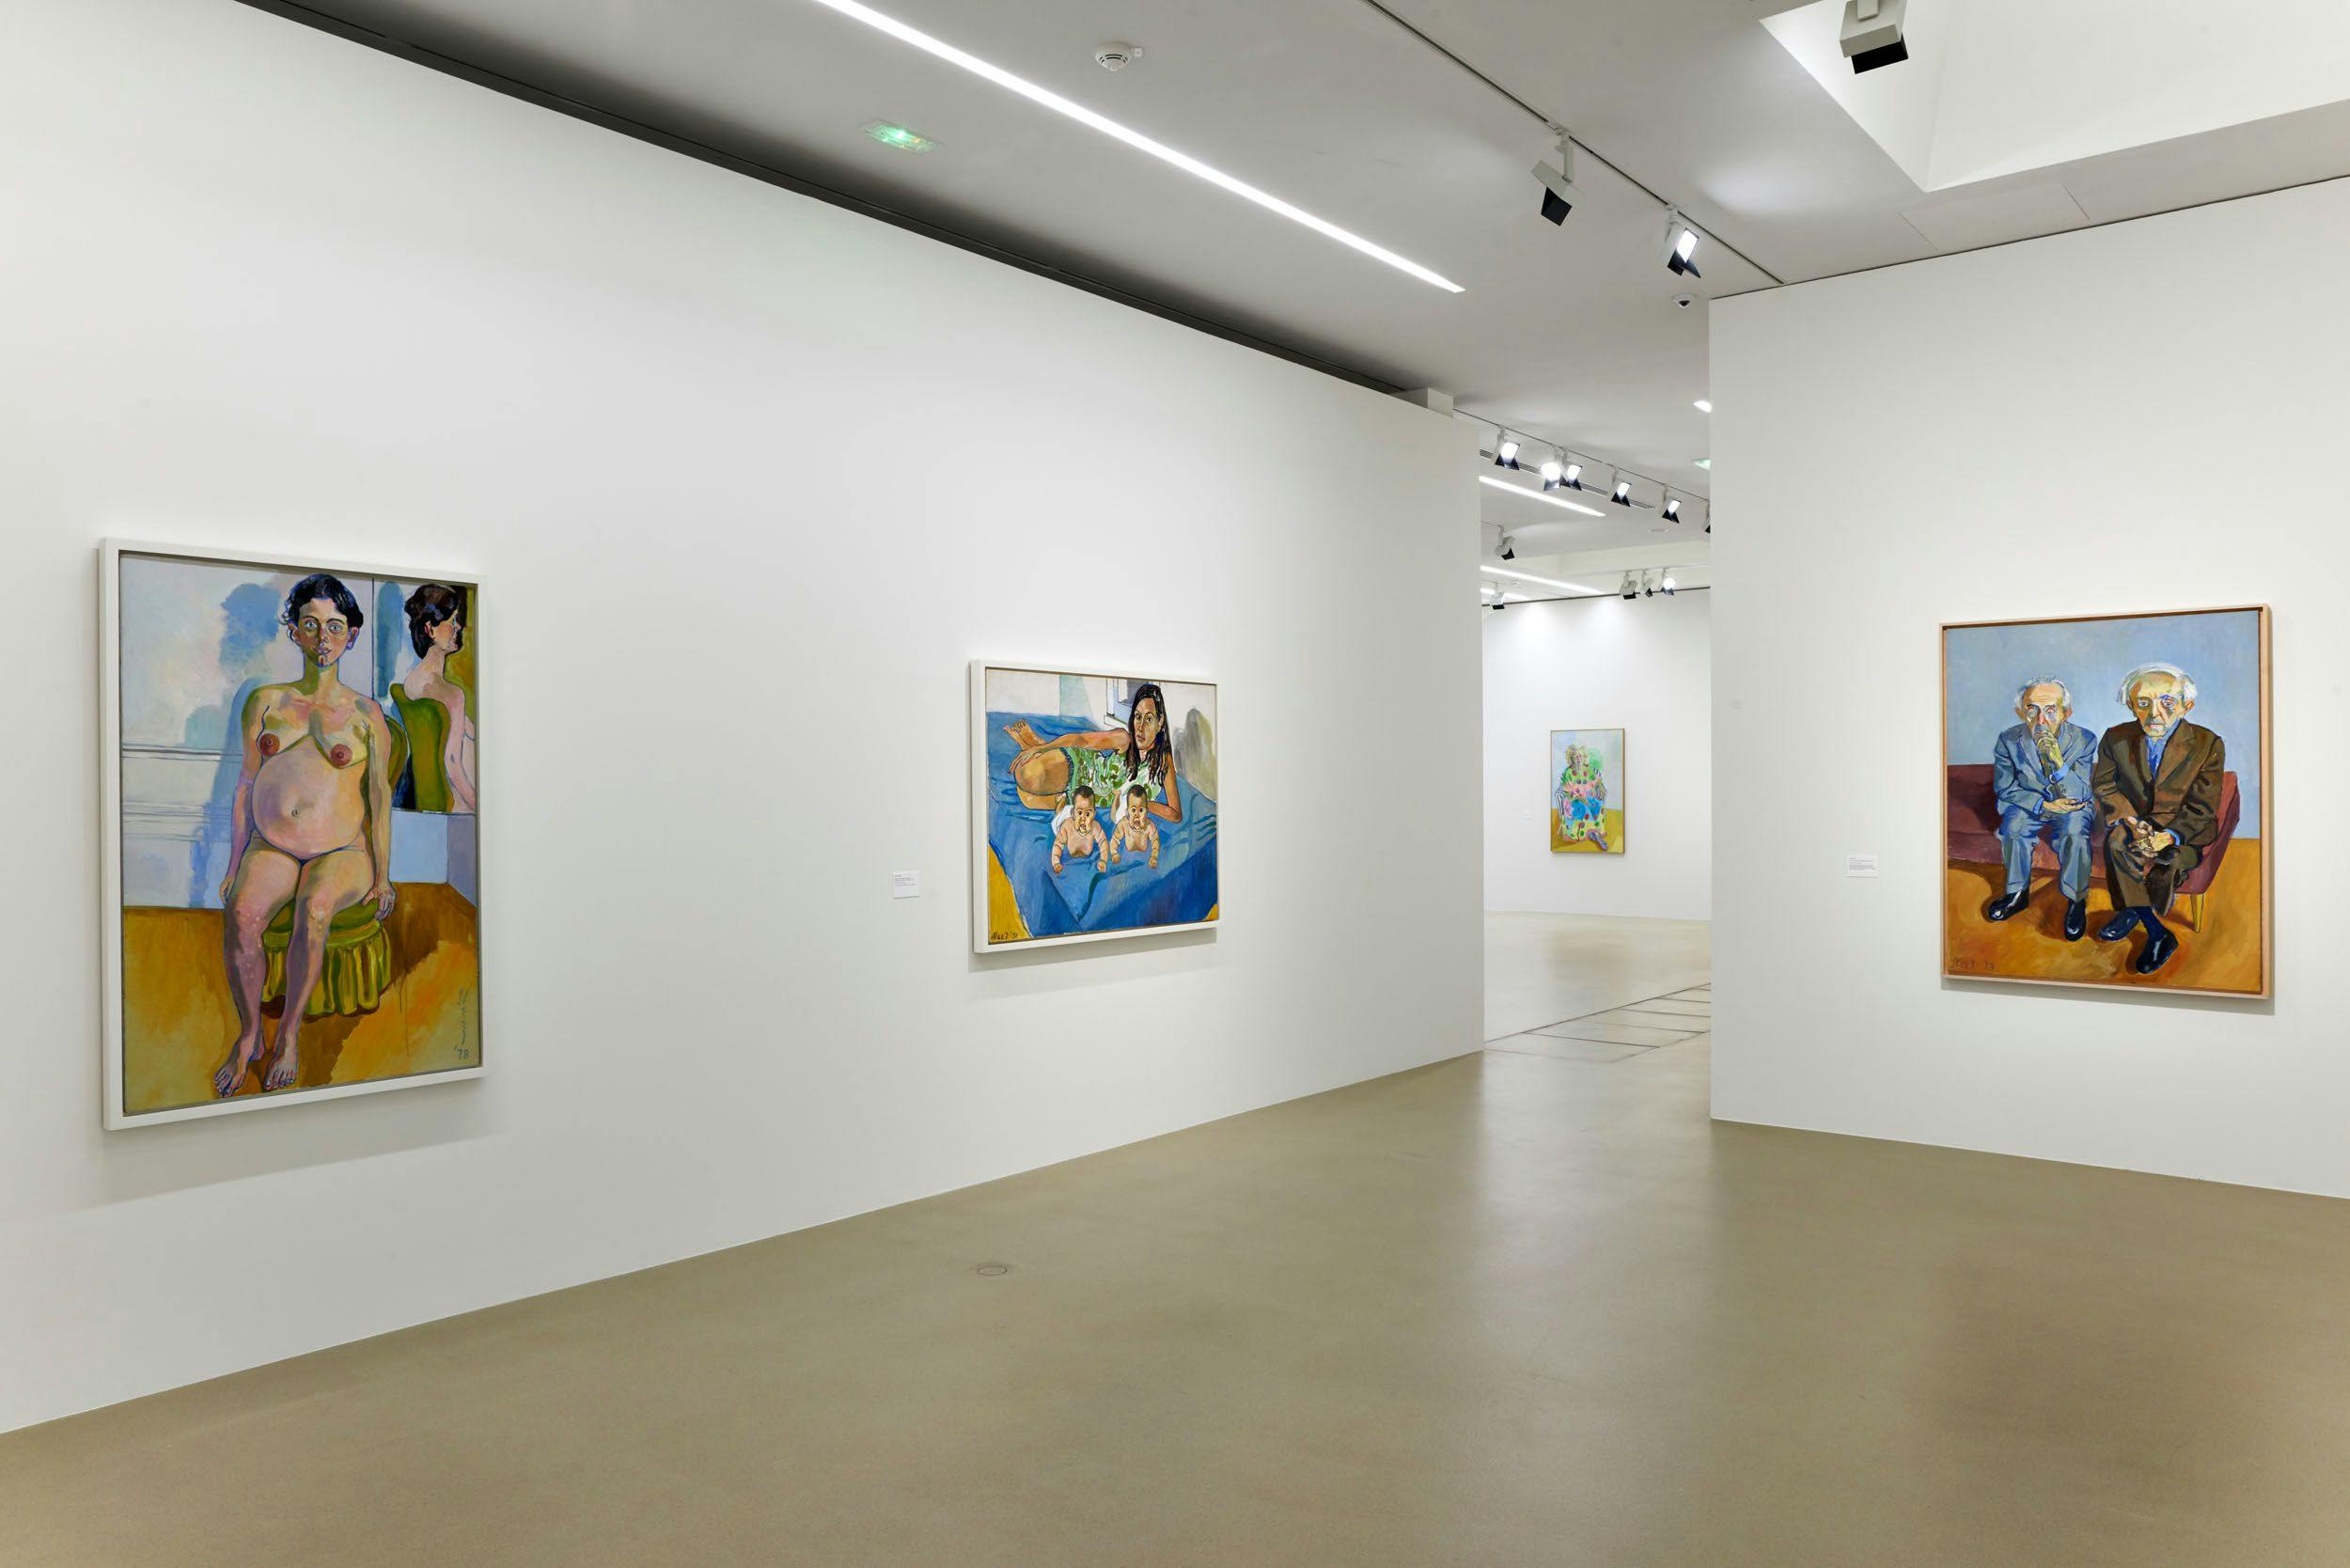 Installation view of¬†the exhibition Alice Neel: Painter of Modern Life,¬†at the¬†Fondation Vincent van Gogh in Arles, France, dated 2017.